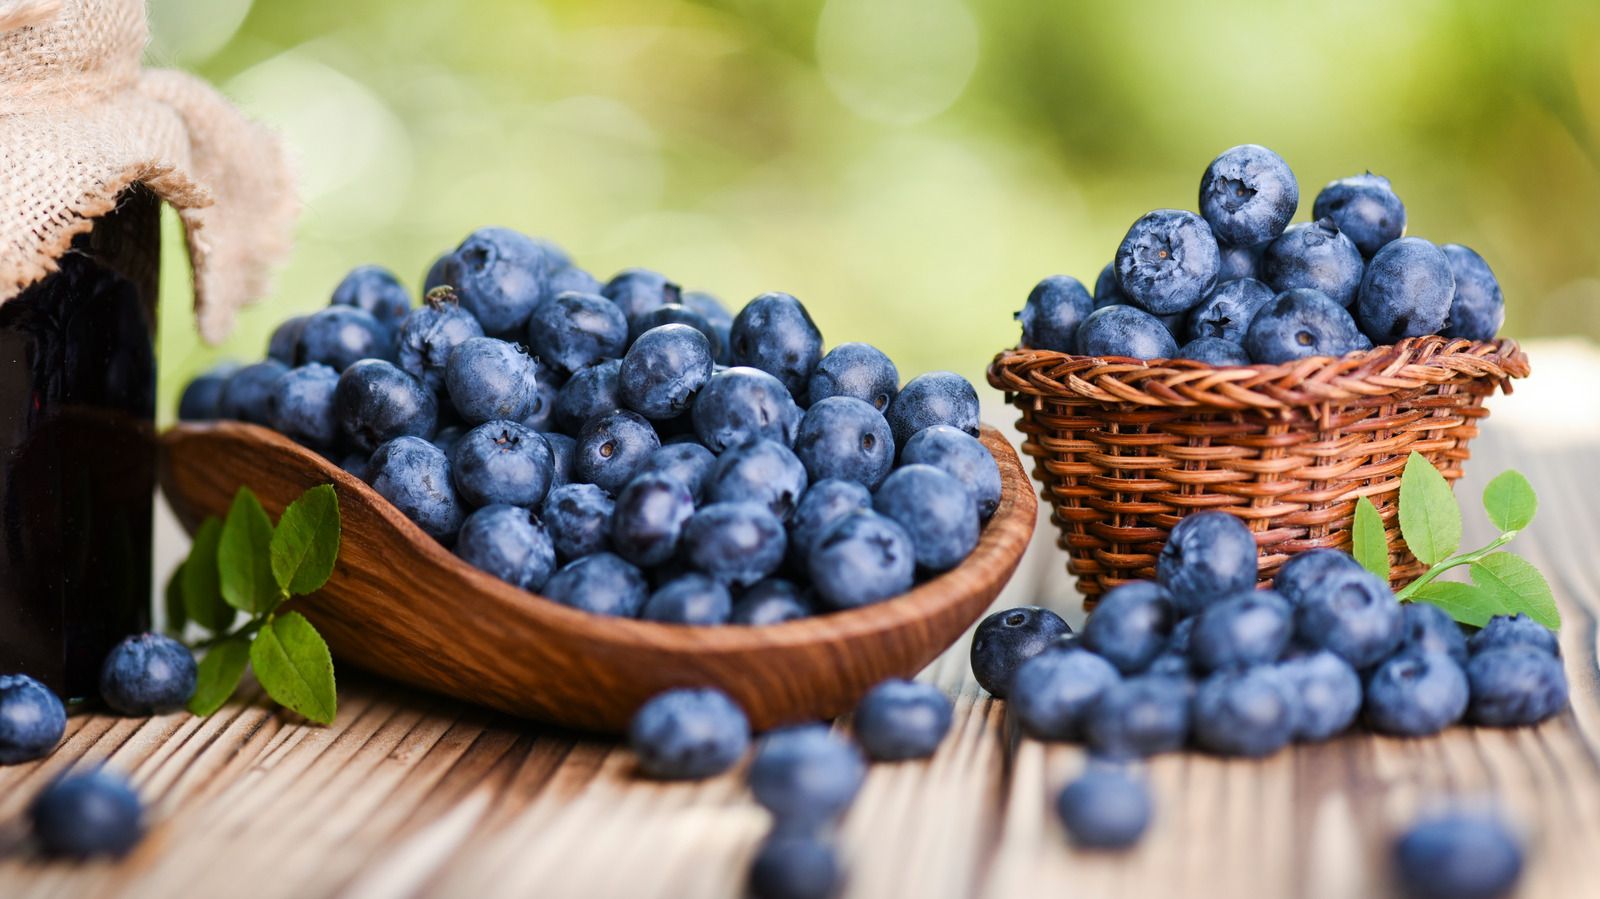 Blueberries: What You Need To Know